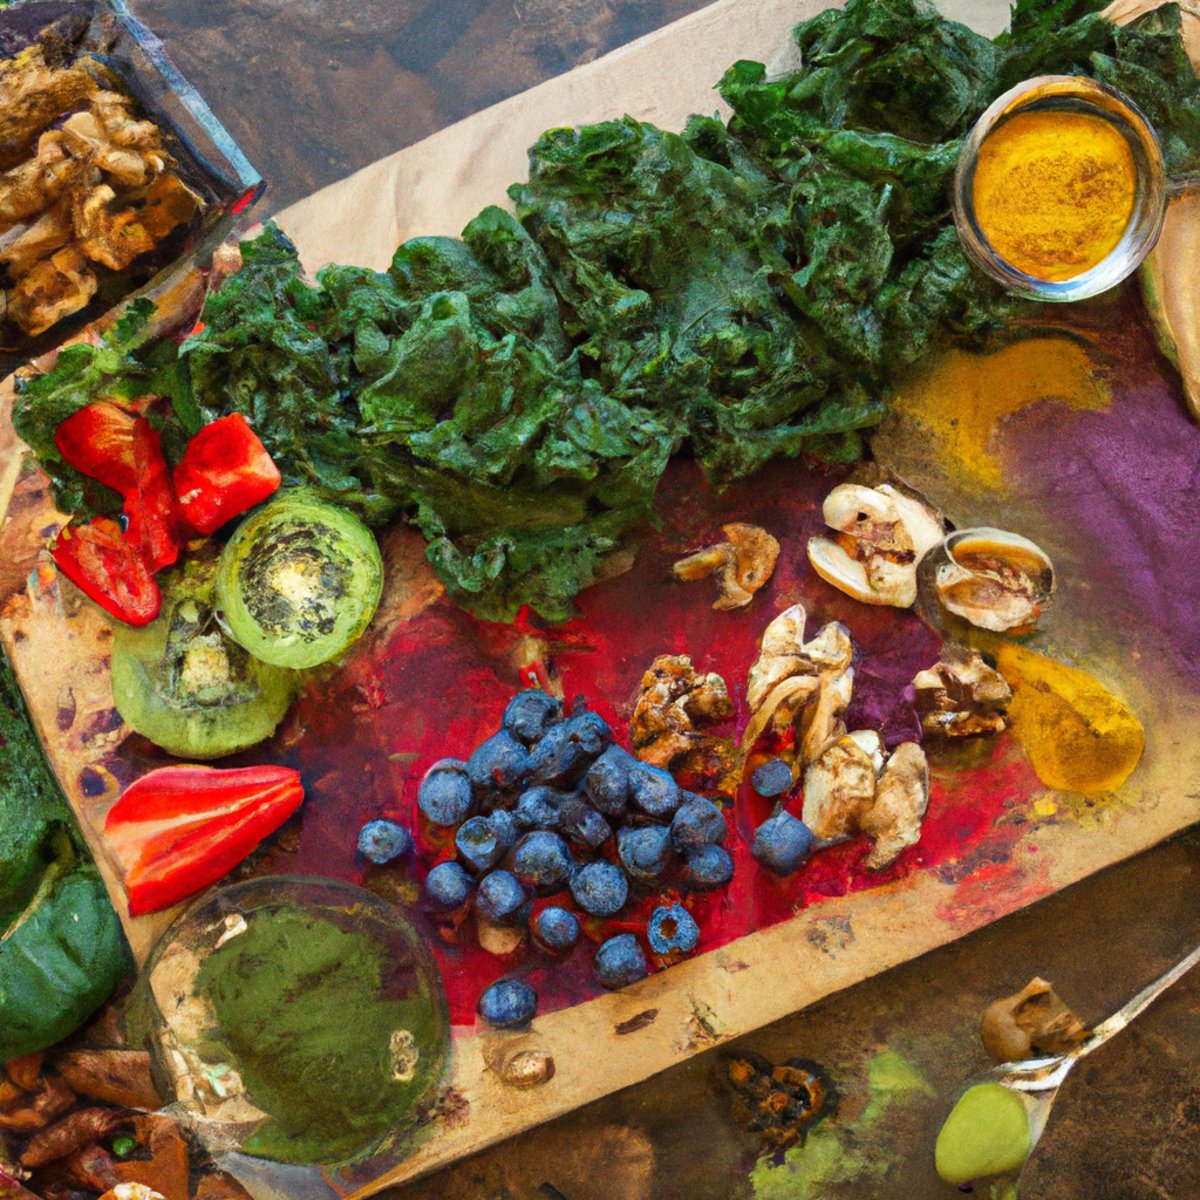 The photo features a wooden cutting board with an array of colorful superfoods arranged in an artful display. Bright red strawberries, deep blueberries, and vibrant green kale leaves are interspersed with creamy avocado slices and crunchy walnuts. A small dish of golden turmeric powder and a jar of rich, dark honey complete the scene. The composition is both visually appealing and enticing, inviting readers to explore the article's suggestions for incorporating these brain-boosting superfoods into their diets.